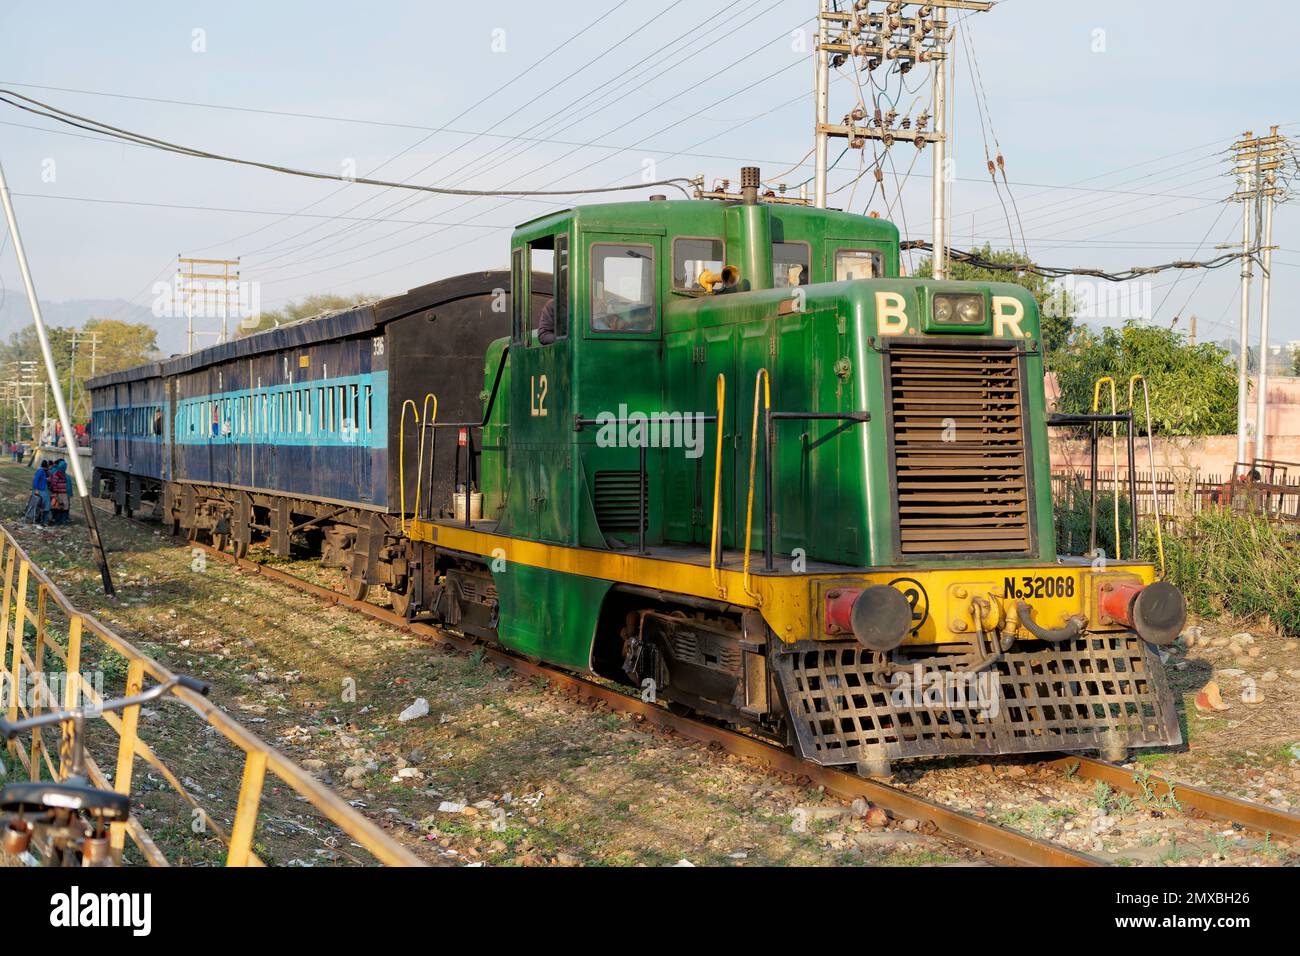 The Bhakra-Nangal Train, This particular train has continued to provide free rides to its passengers for the past 73 years in India. Heritage Railway Stock Photo